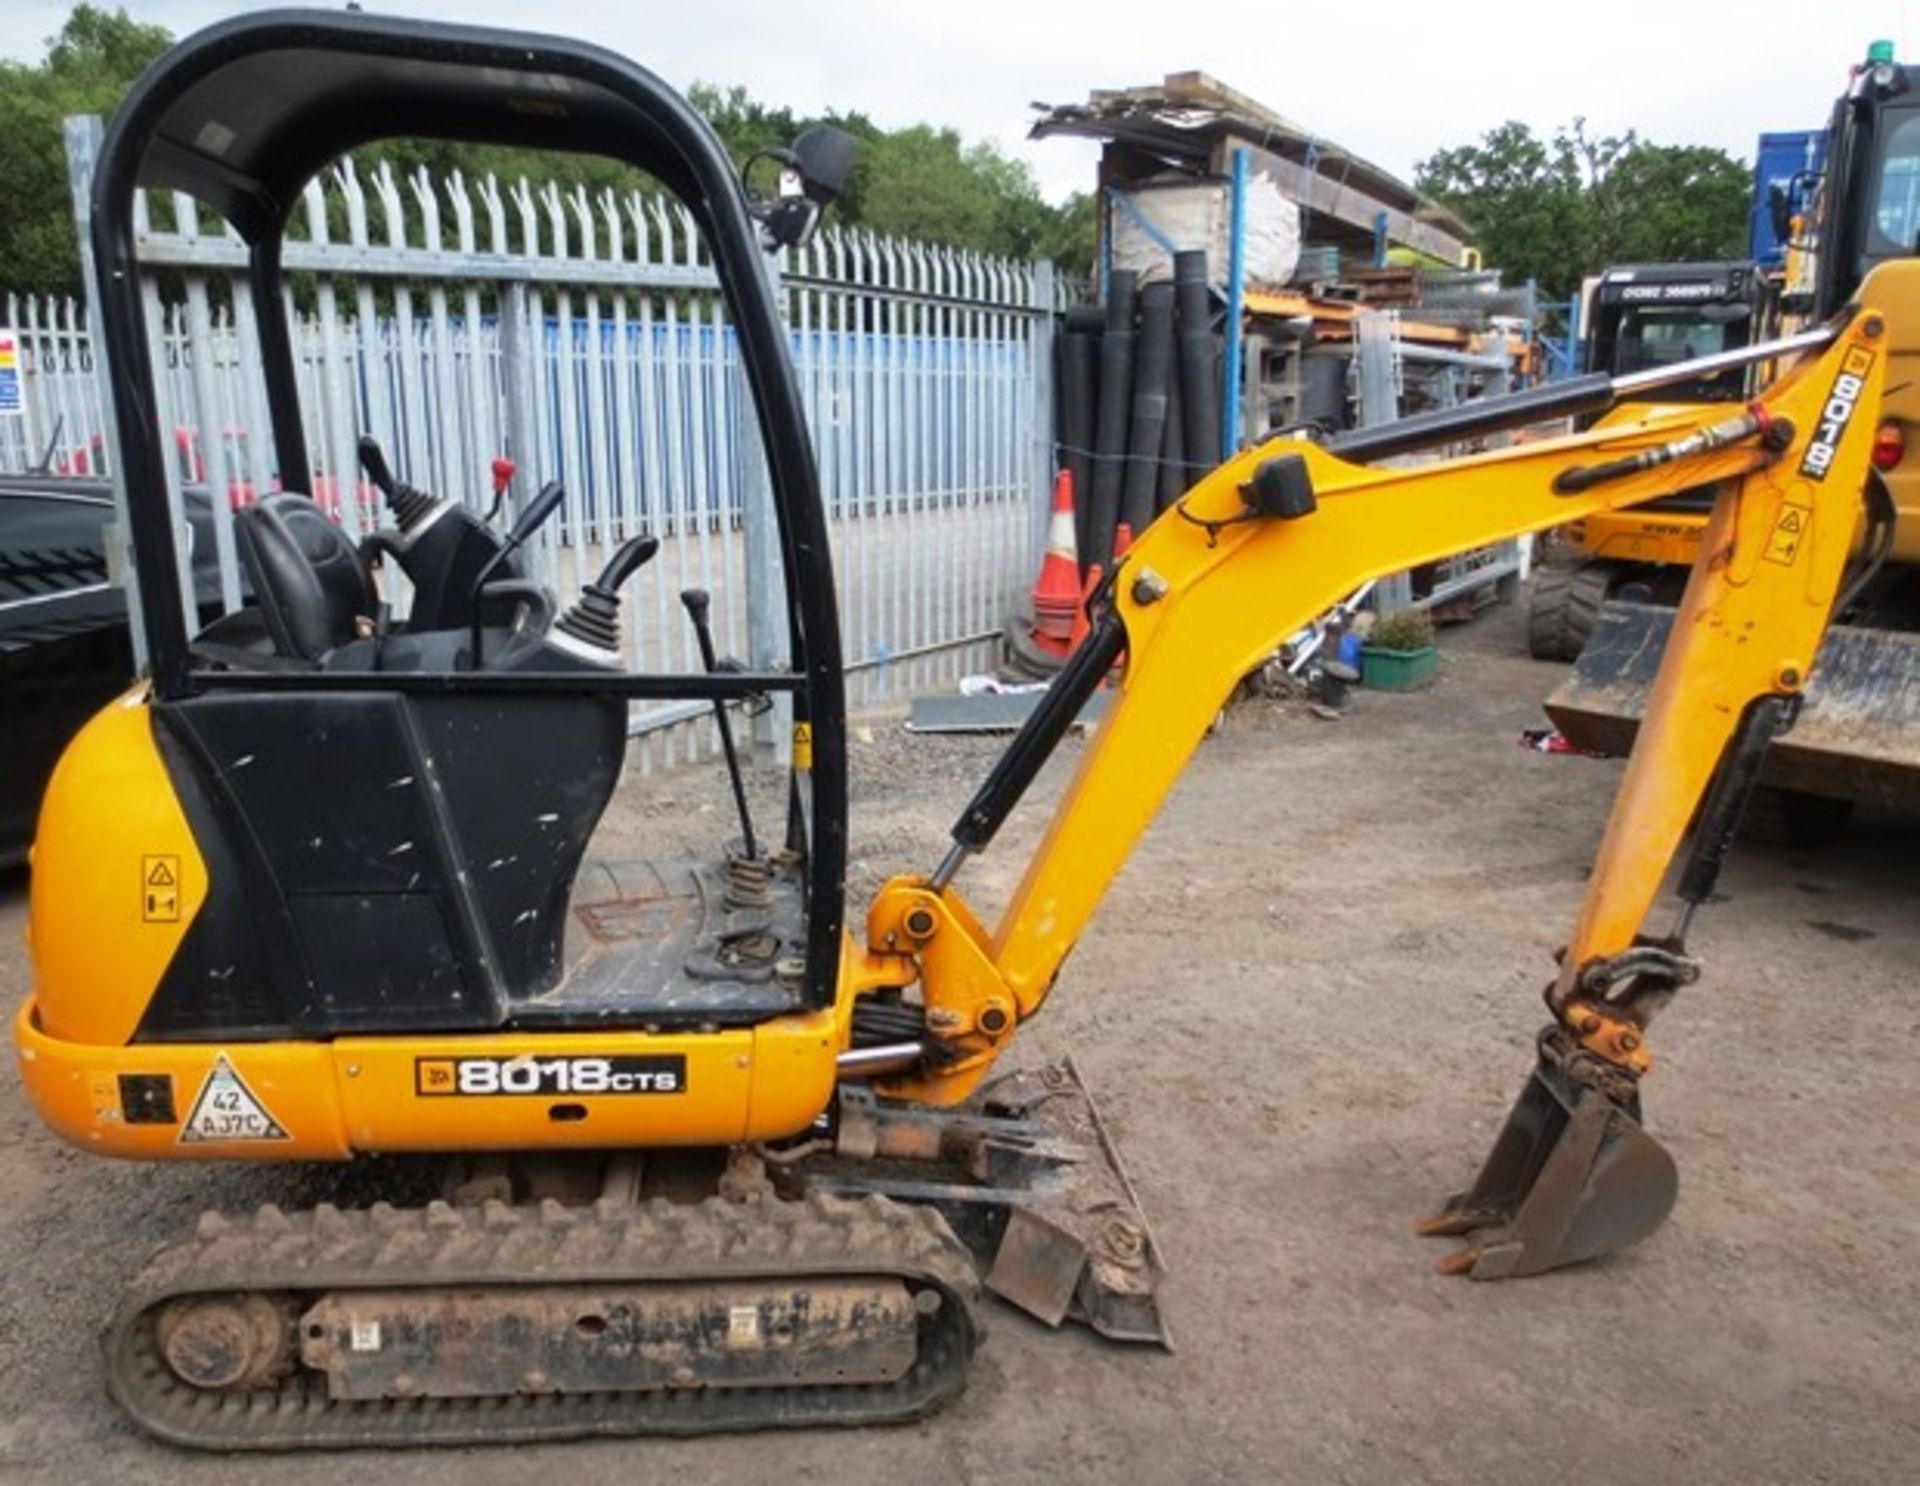 JCB 8018CTS rubber tracked mini hydraulic excavator with front dozer, product ID No: - Image 4 of 13